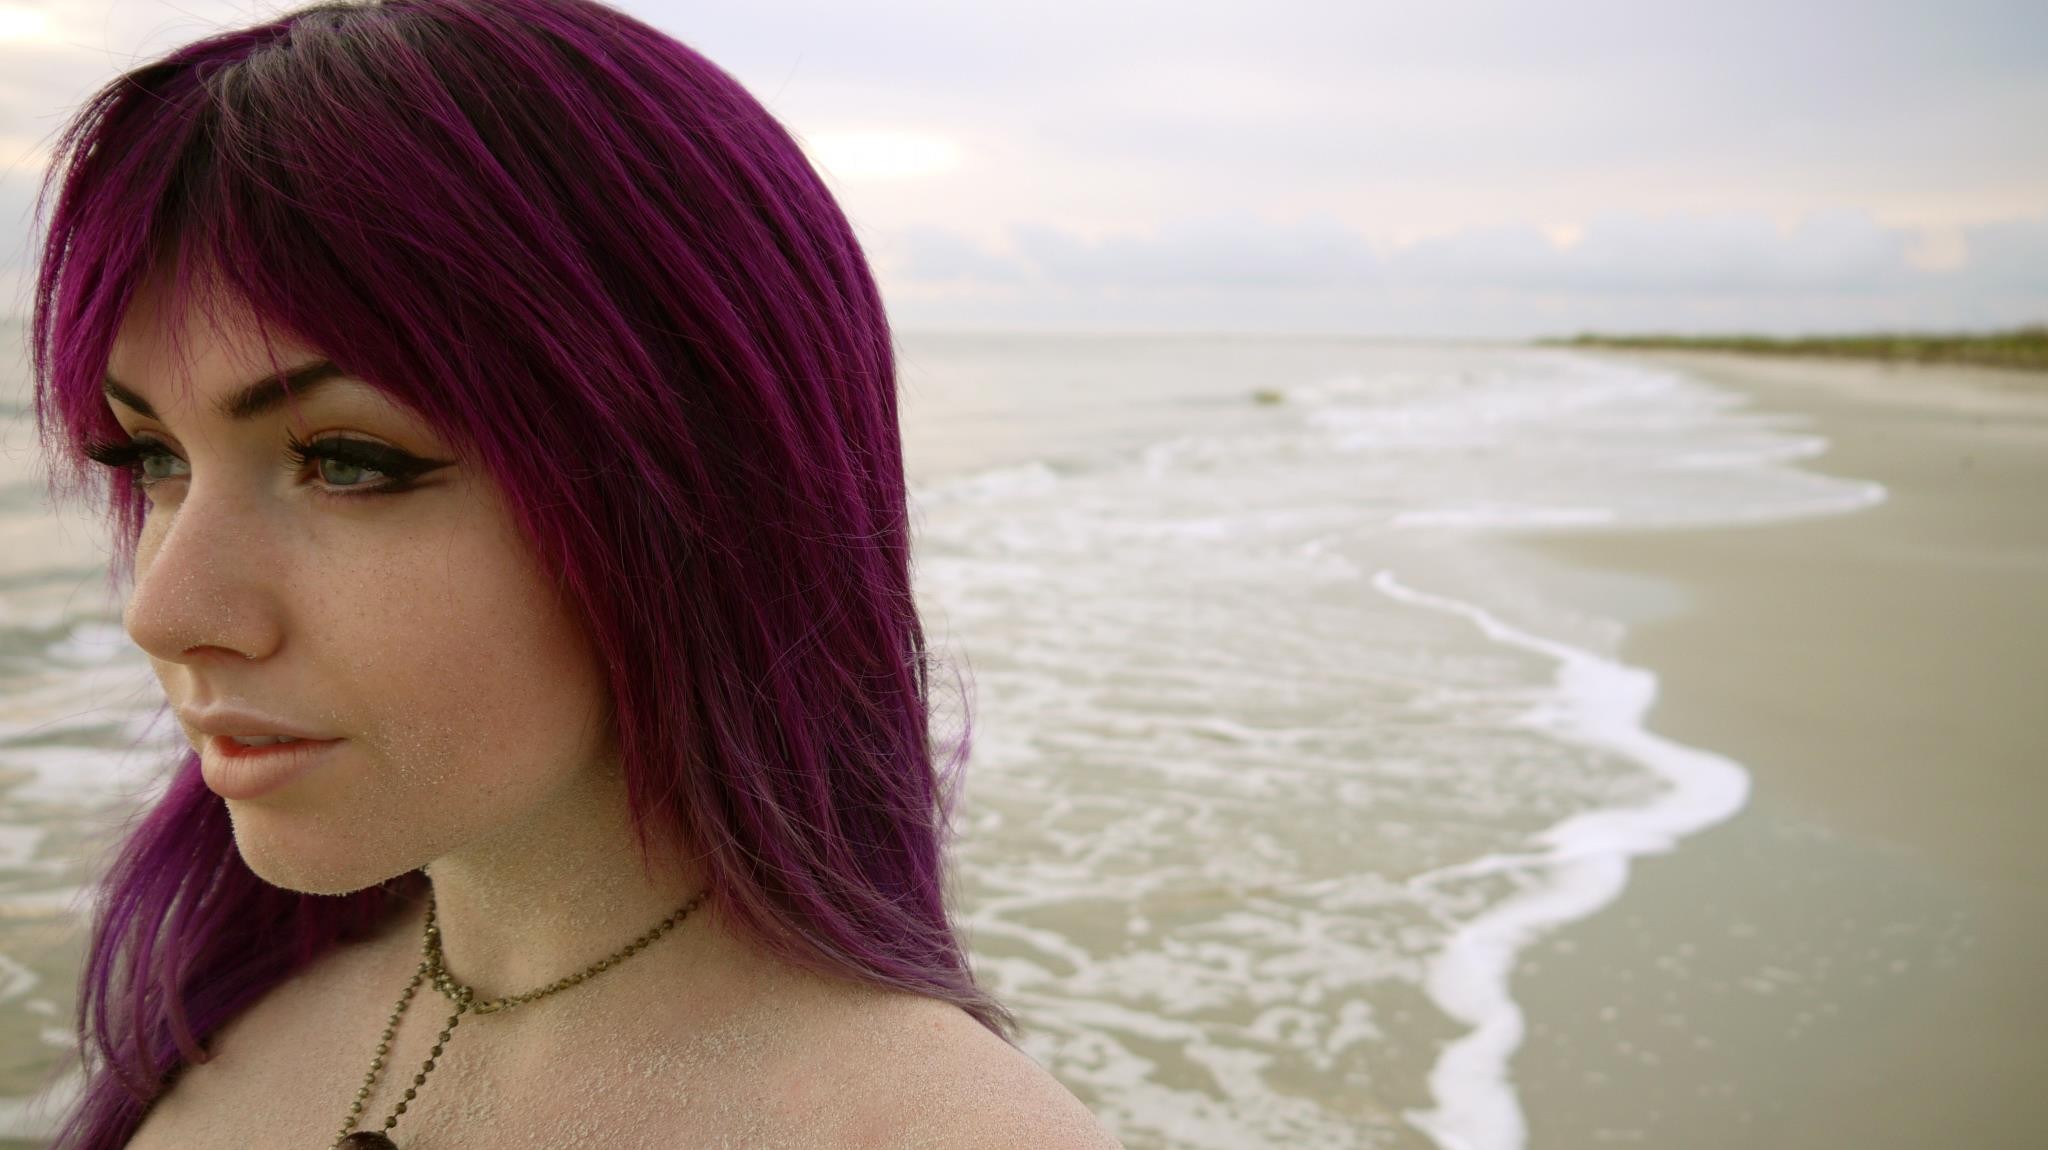 Free photo A girl with red hair on the seashore